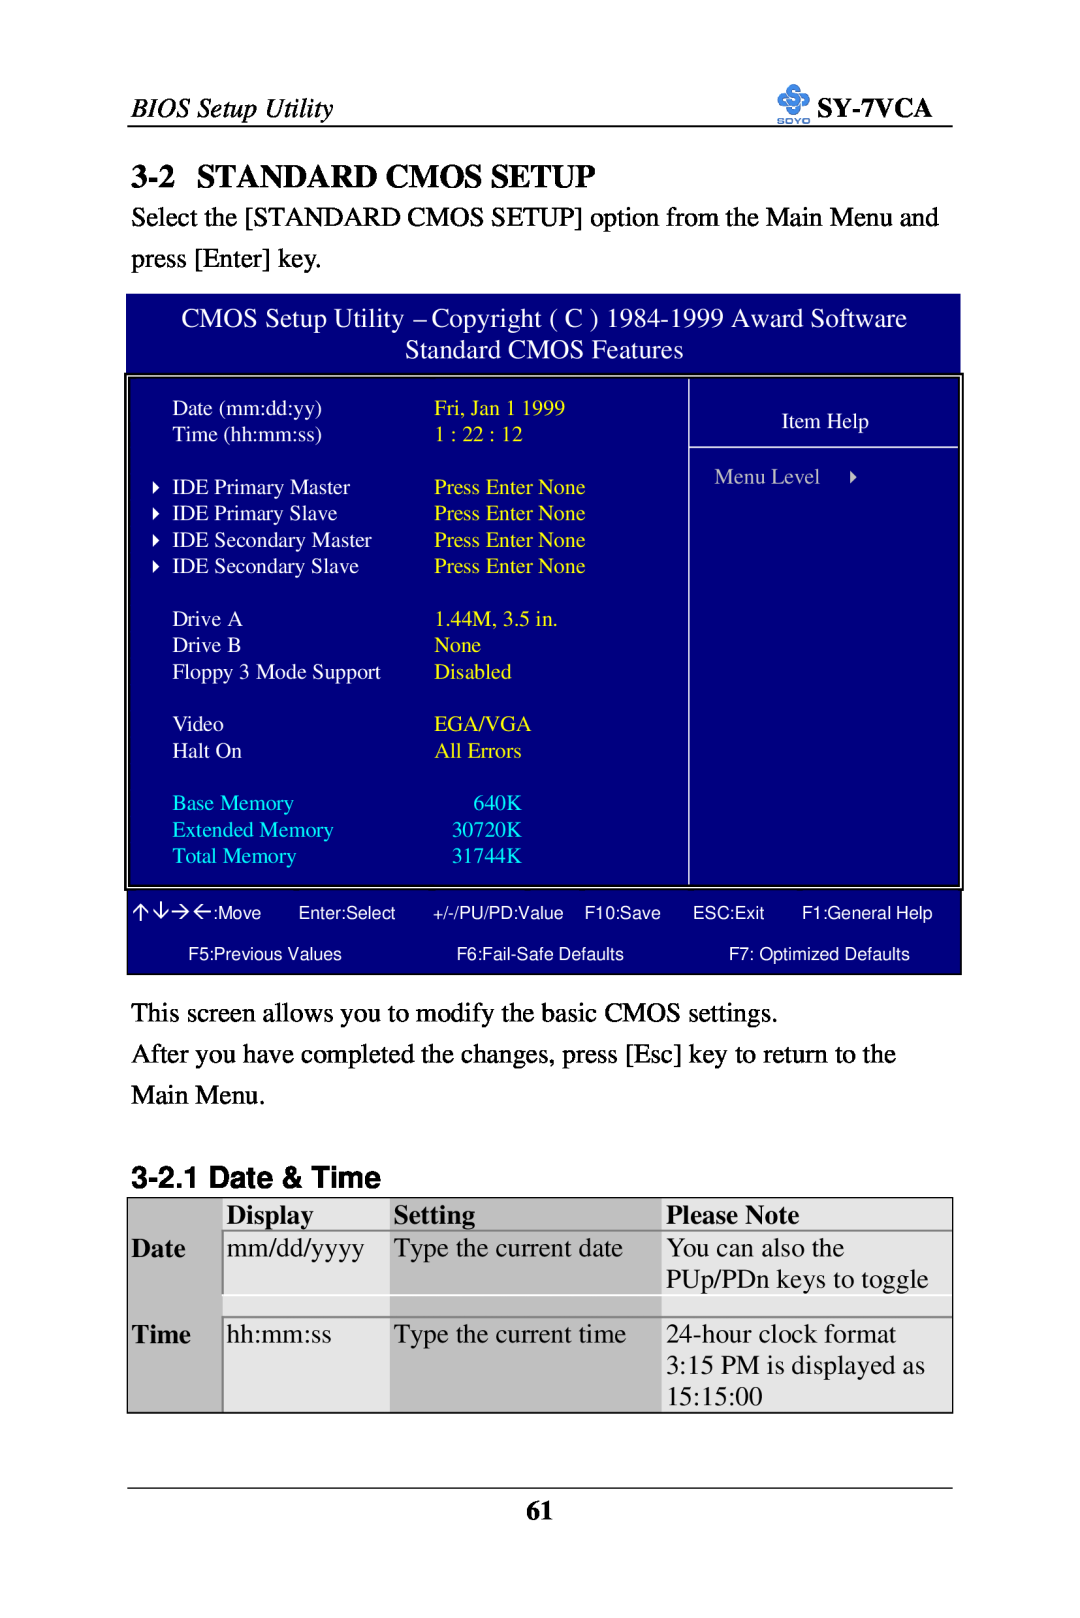 SOYO SY-7VCA user manual Standard Cmos Setup, Date & Time, Standard CMOS Features 